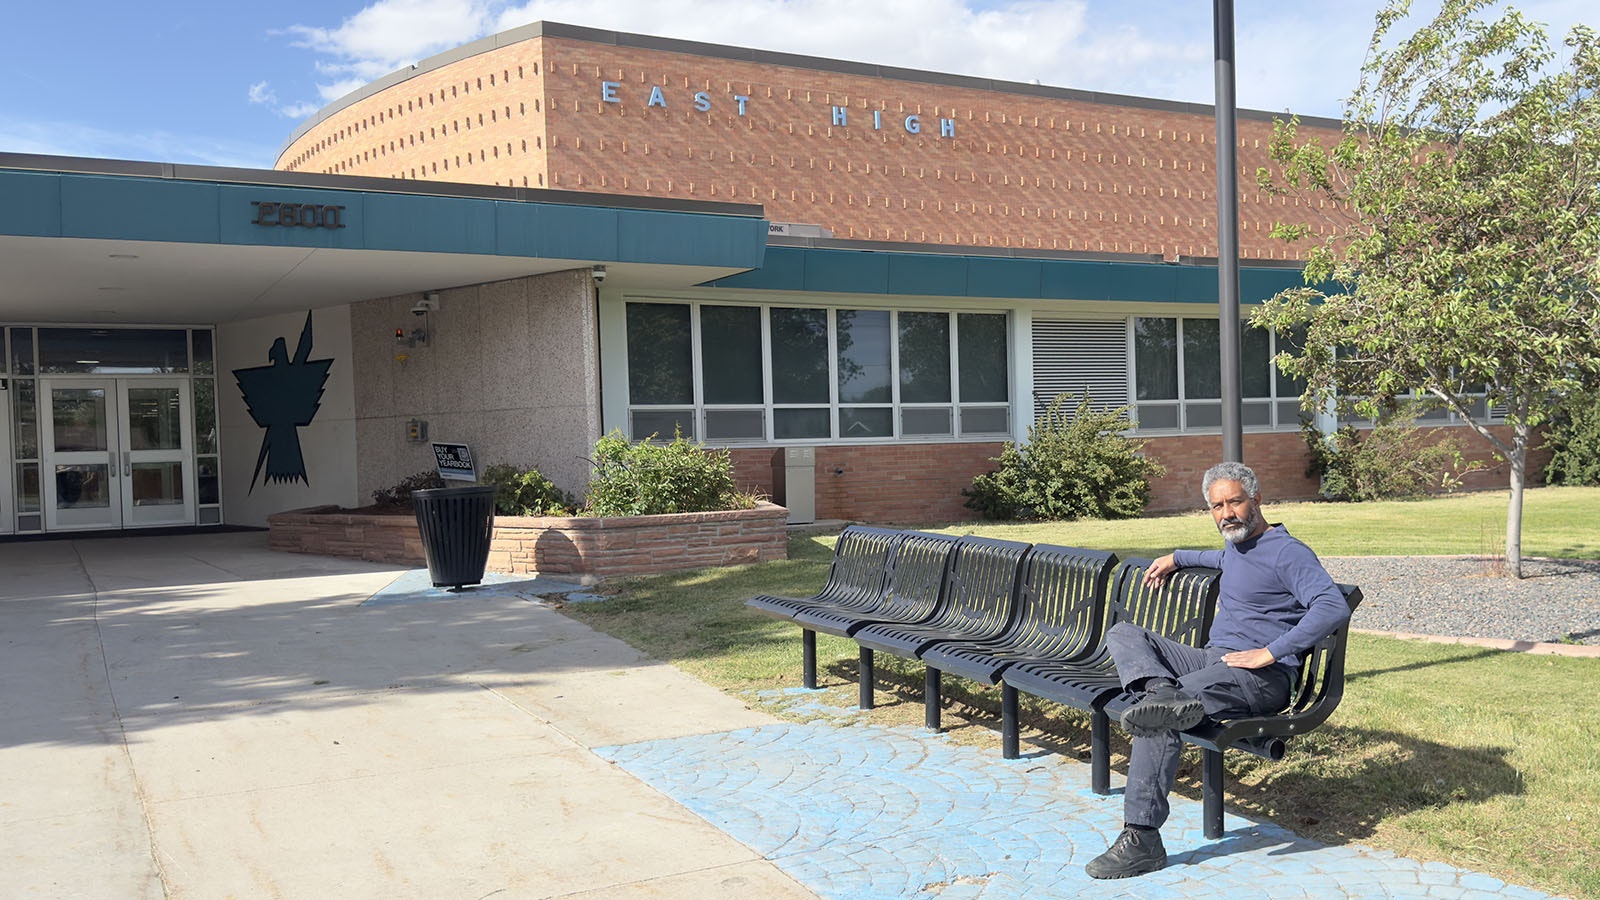 Gene Clemetson was escorted out of East High School in Laramie County School District No. 1 while substitute teaching in March. The substitute teacher says he’s been barred from a Cheyenne-based school district after refusing to use preferred transgender names of students.